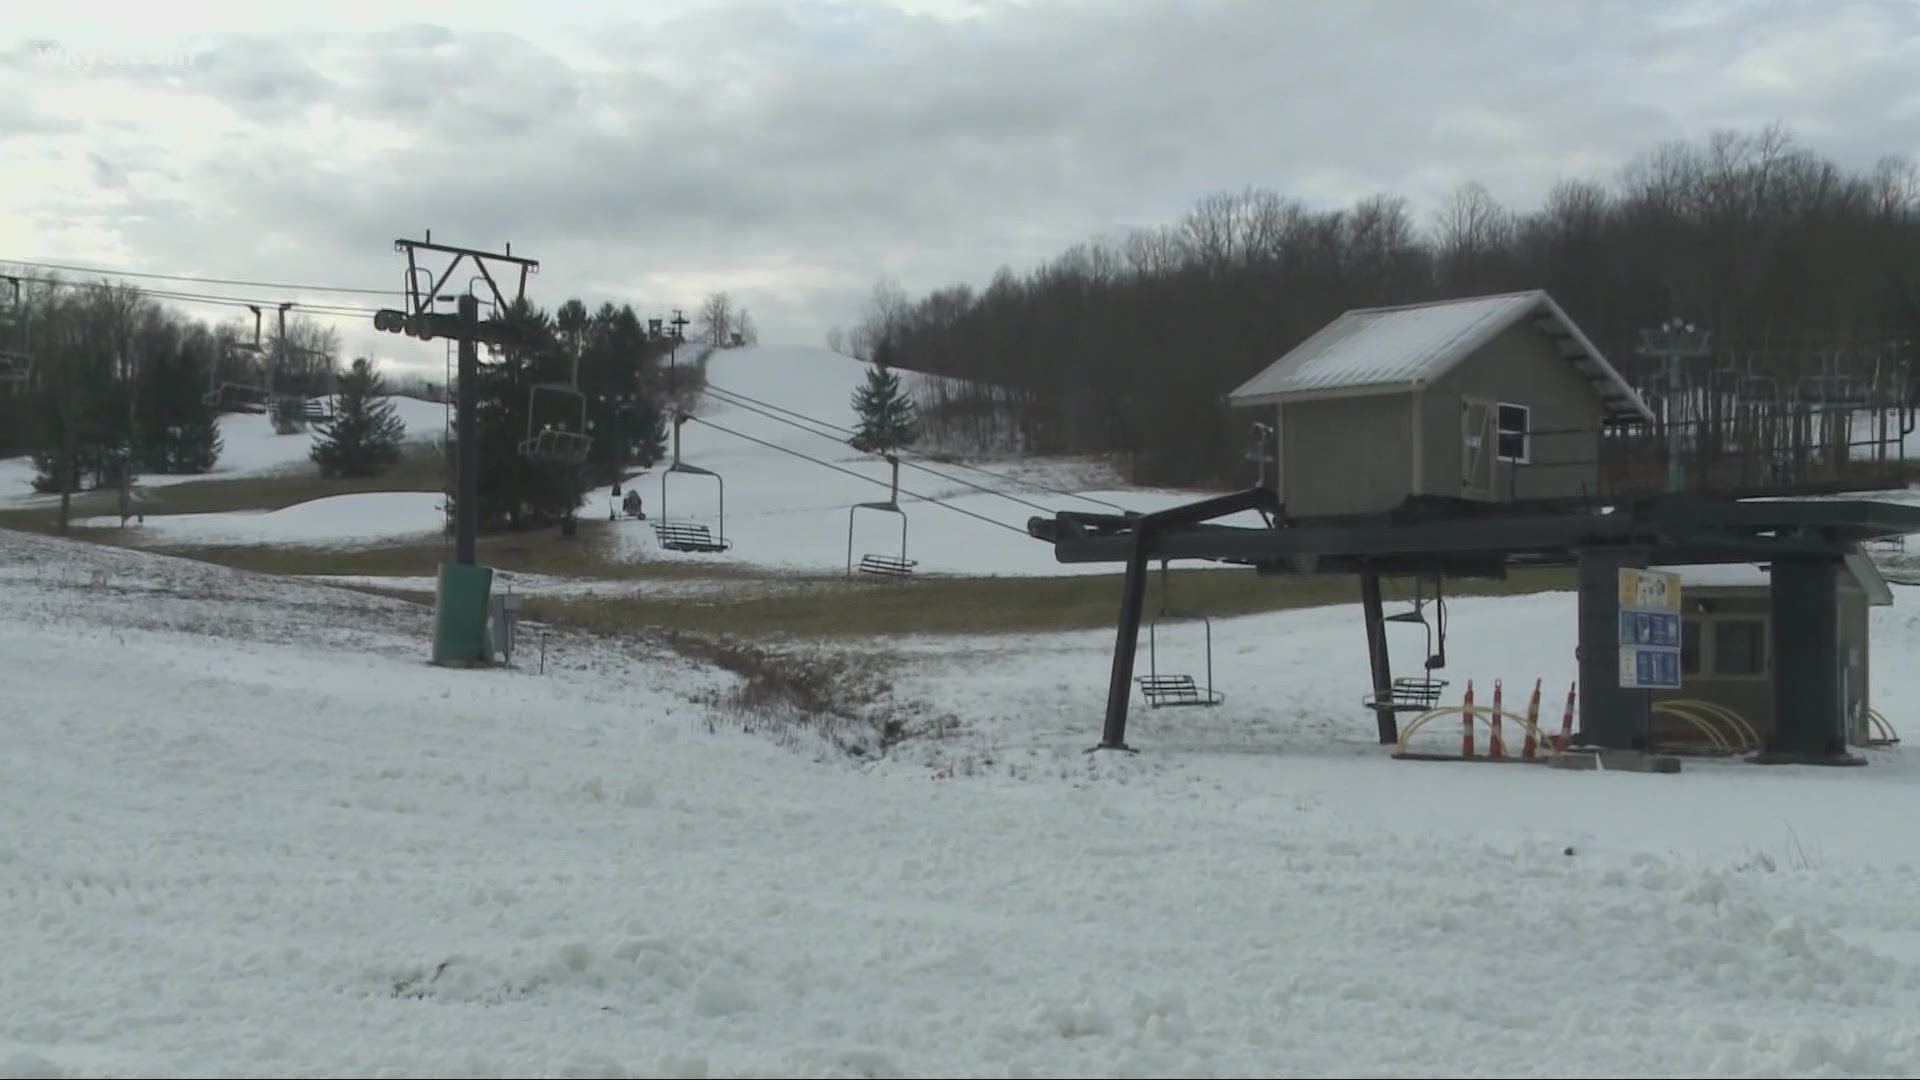 Here in Northeast Ohio, ski resorts are getting ready to reopen. Carl Bachtel has a look at the preparations taking place.